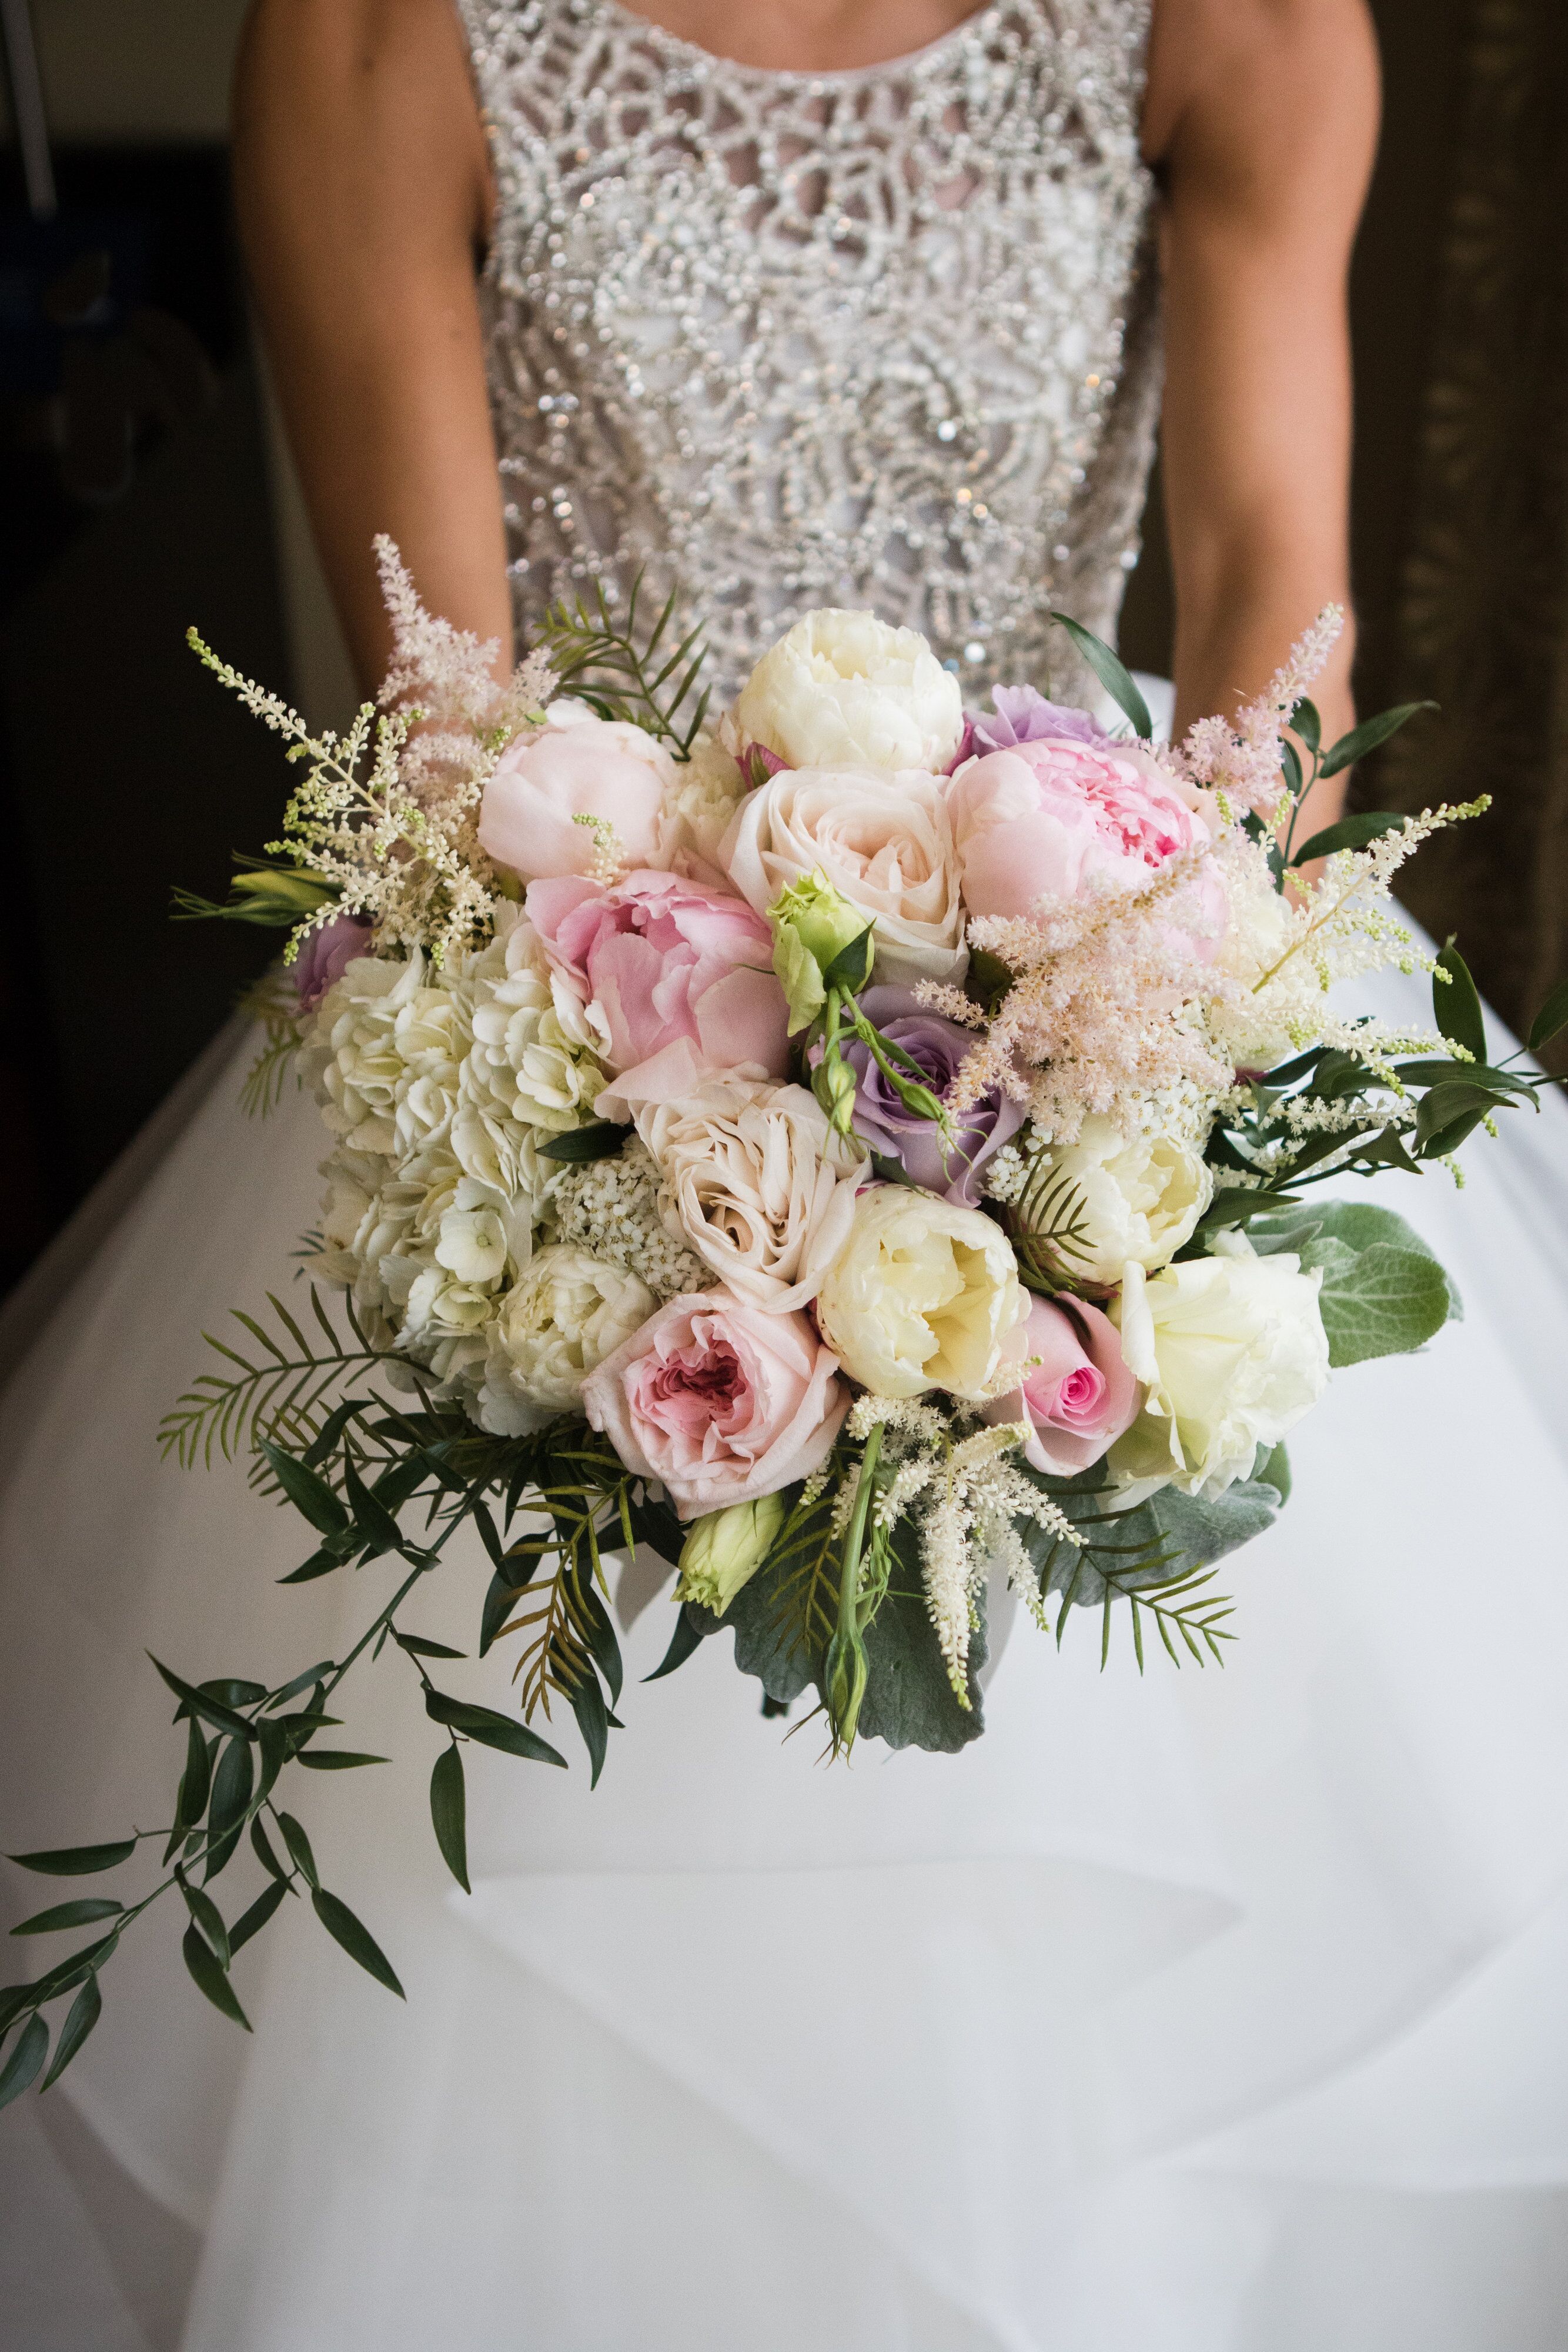 Pink, Cream, Romantic Bridal Bouquet With Peonies